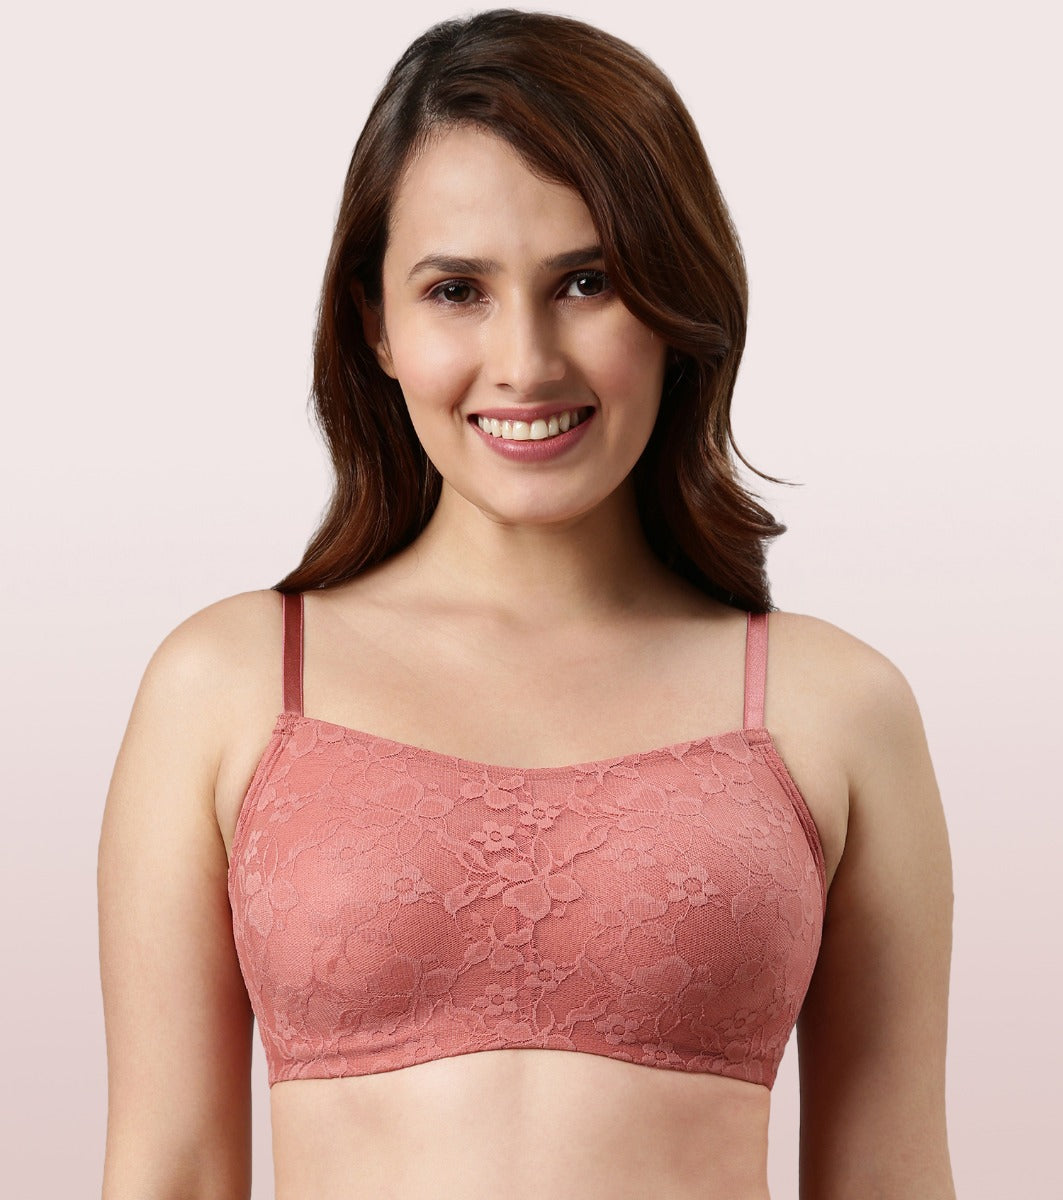 Enamor A019 T-Shirt Cotton Bra - Non-Padded Wirefree - Black 38C in  Vadodara at best price by Milan Collection - Justdial